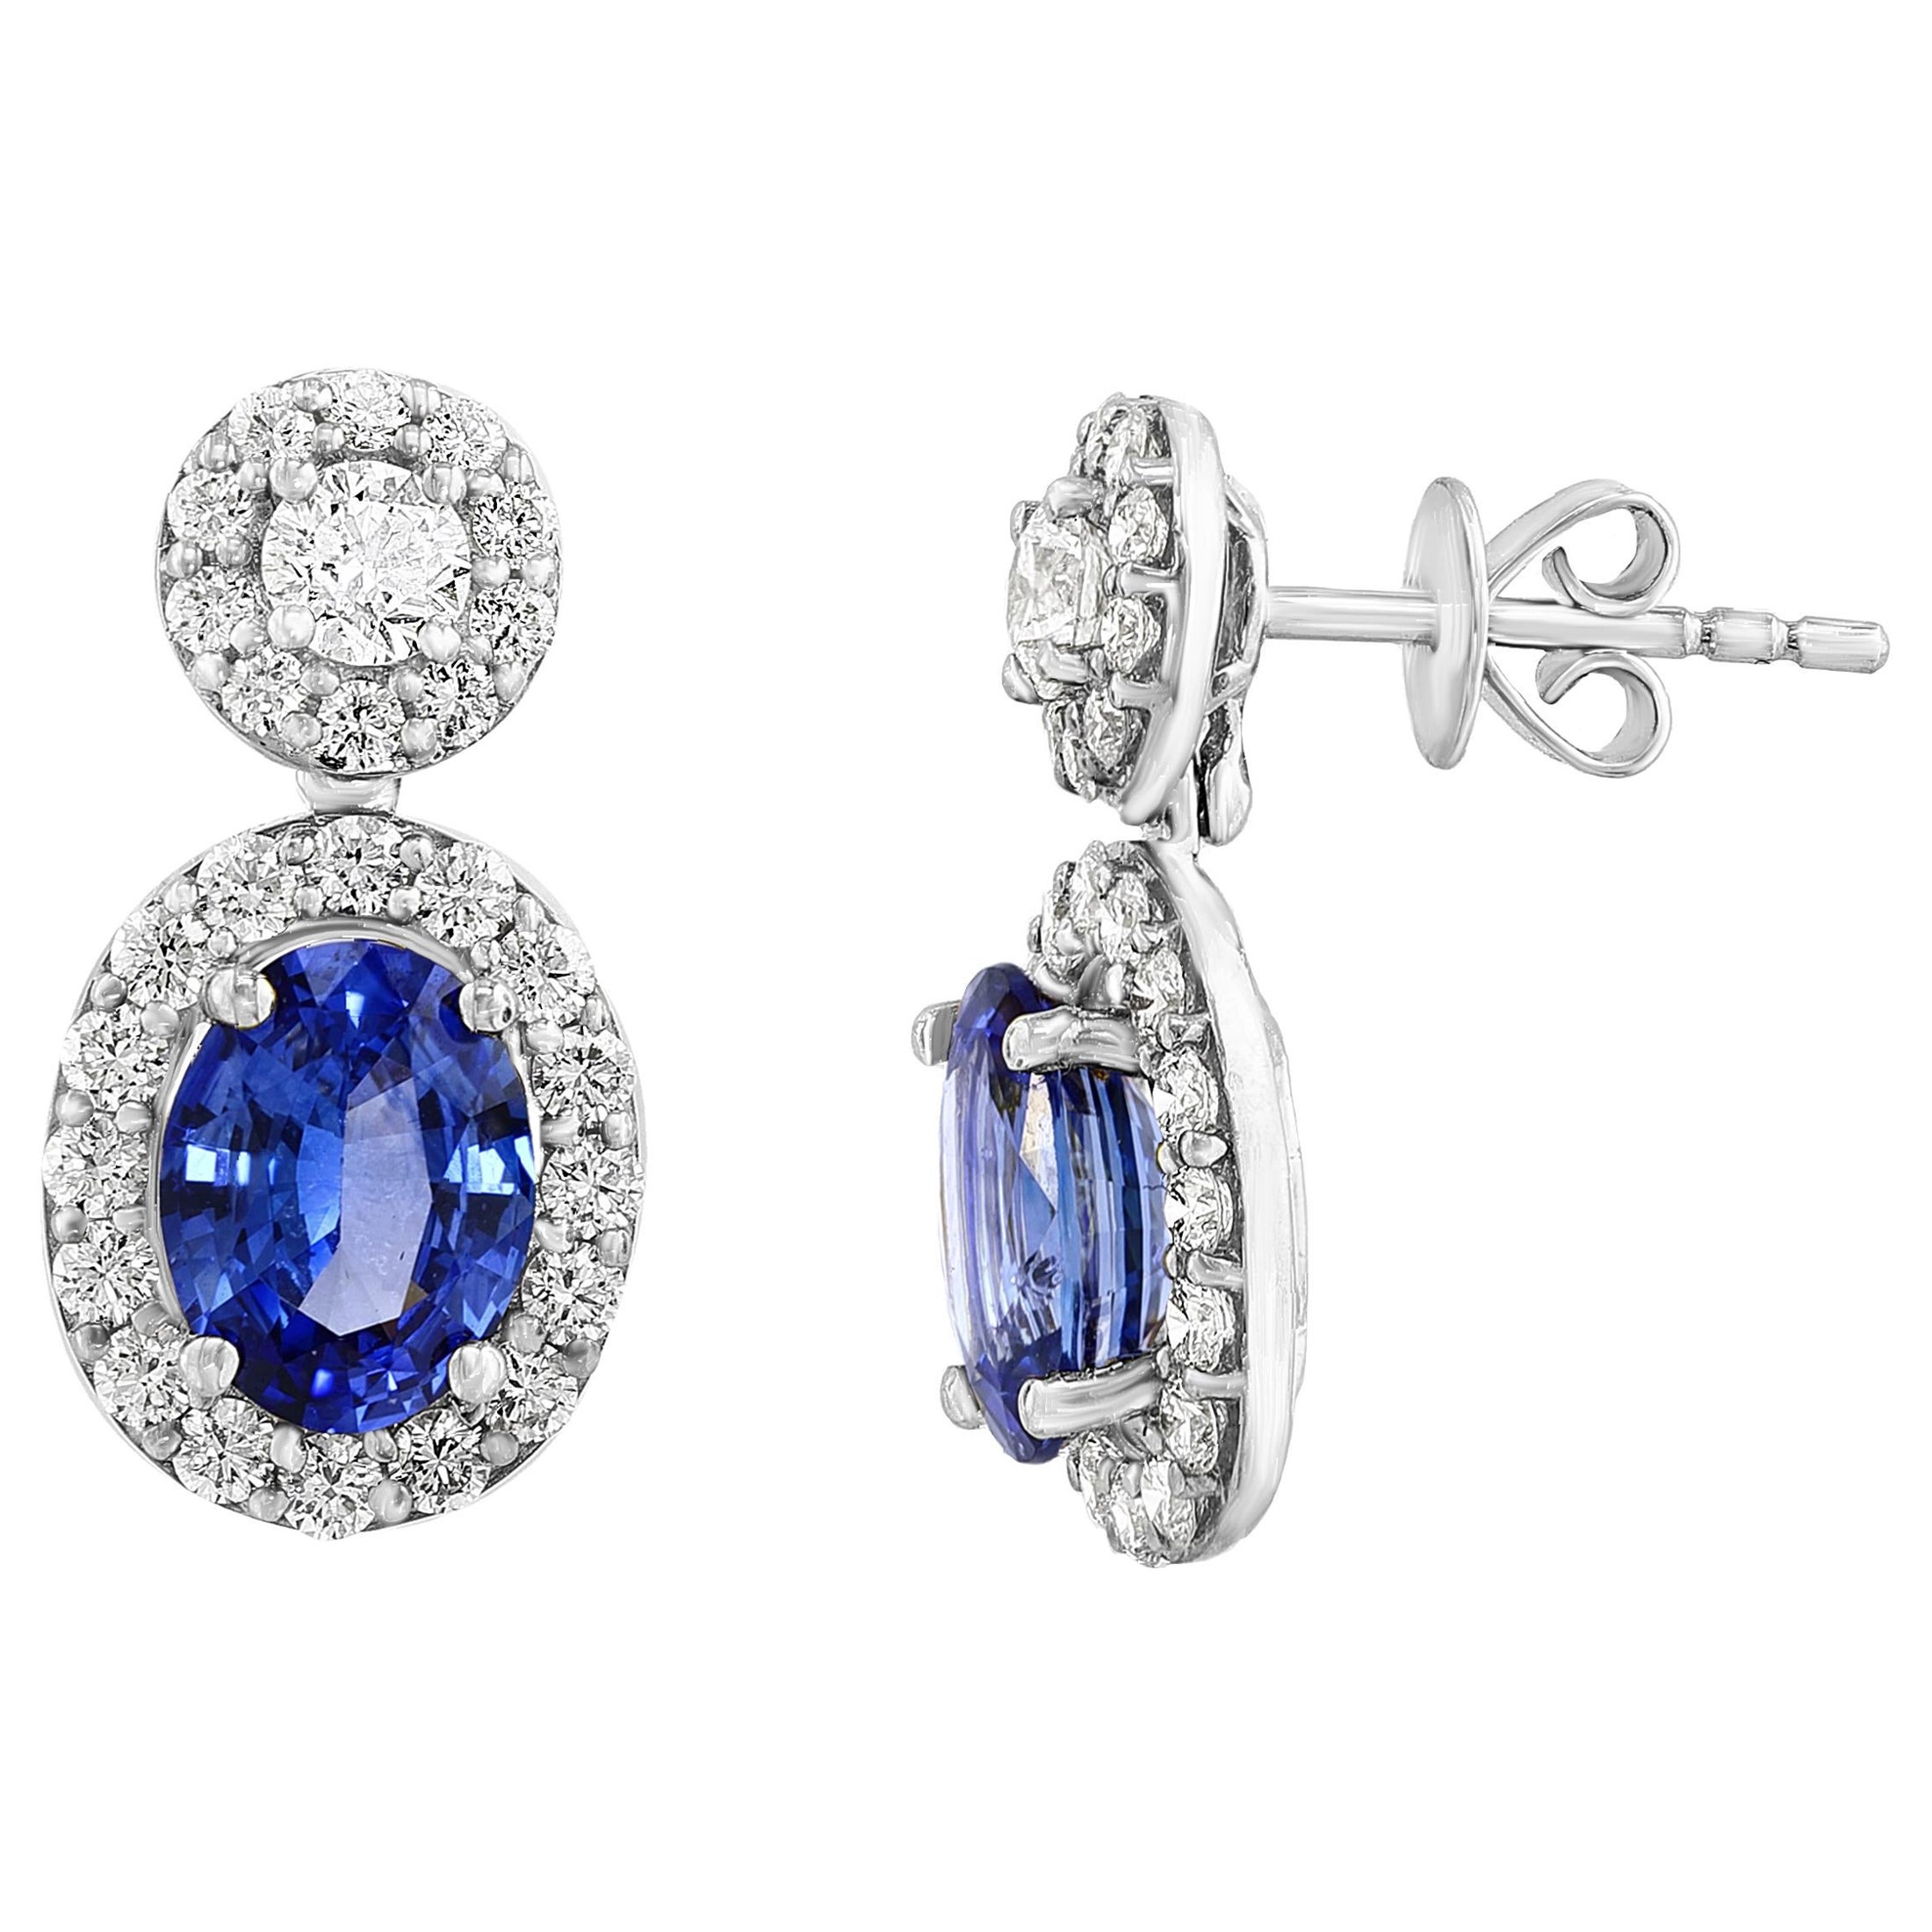 2.01 Carat of Oval cut Sapphires and Diamond Drop Earrings in 18K White Gold For Sale